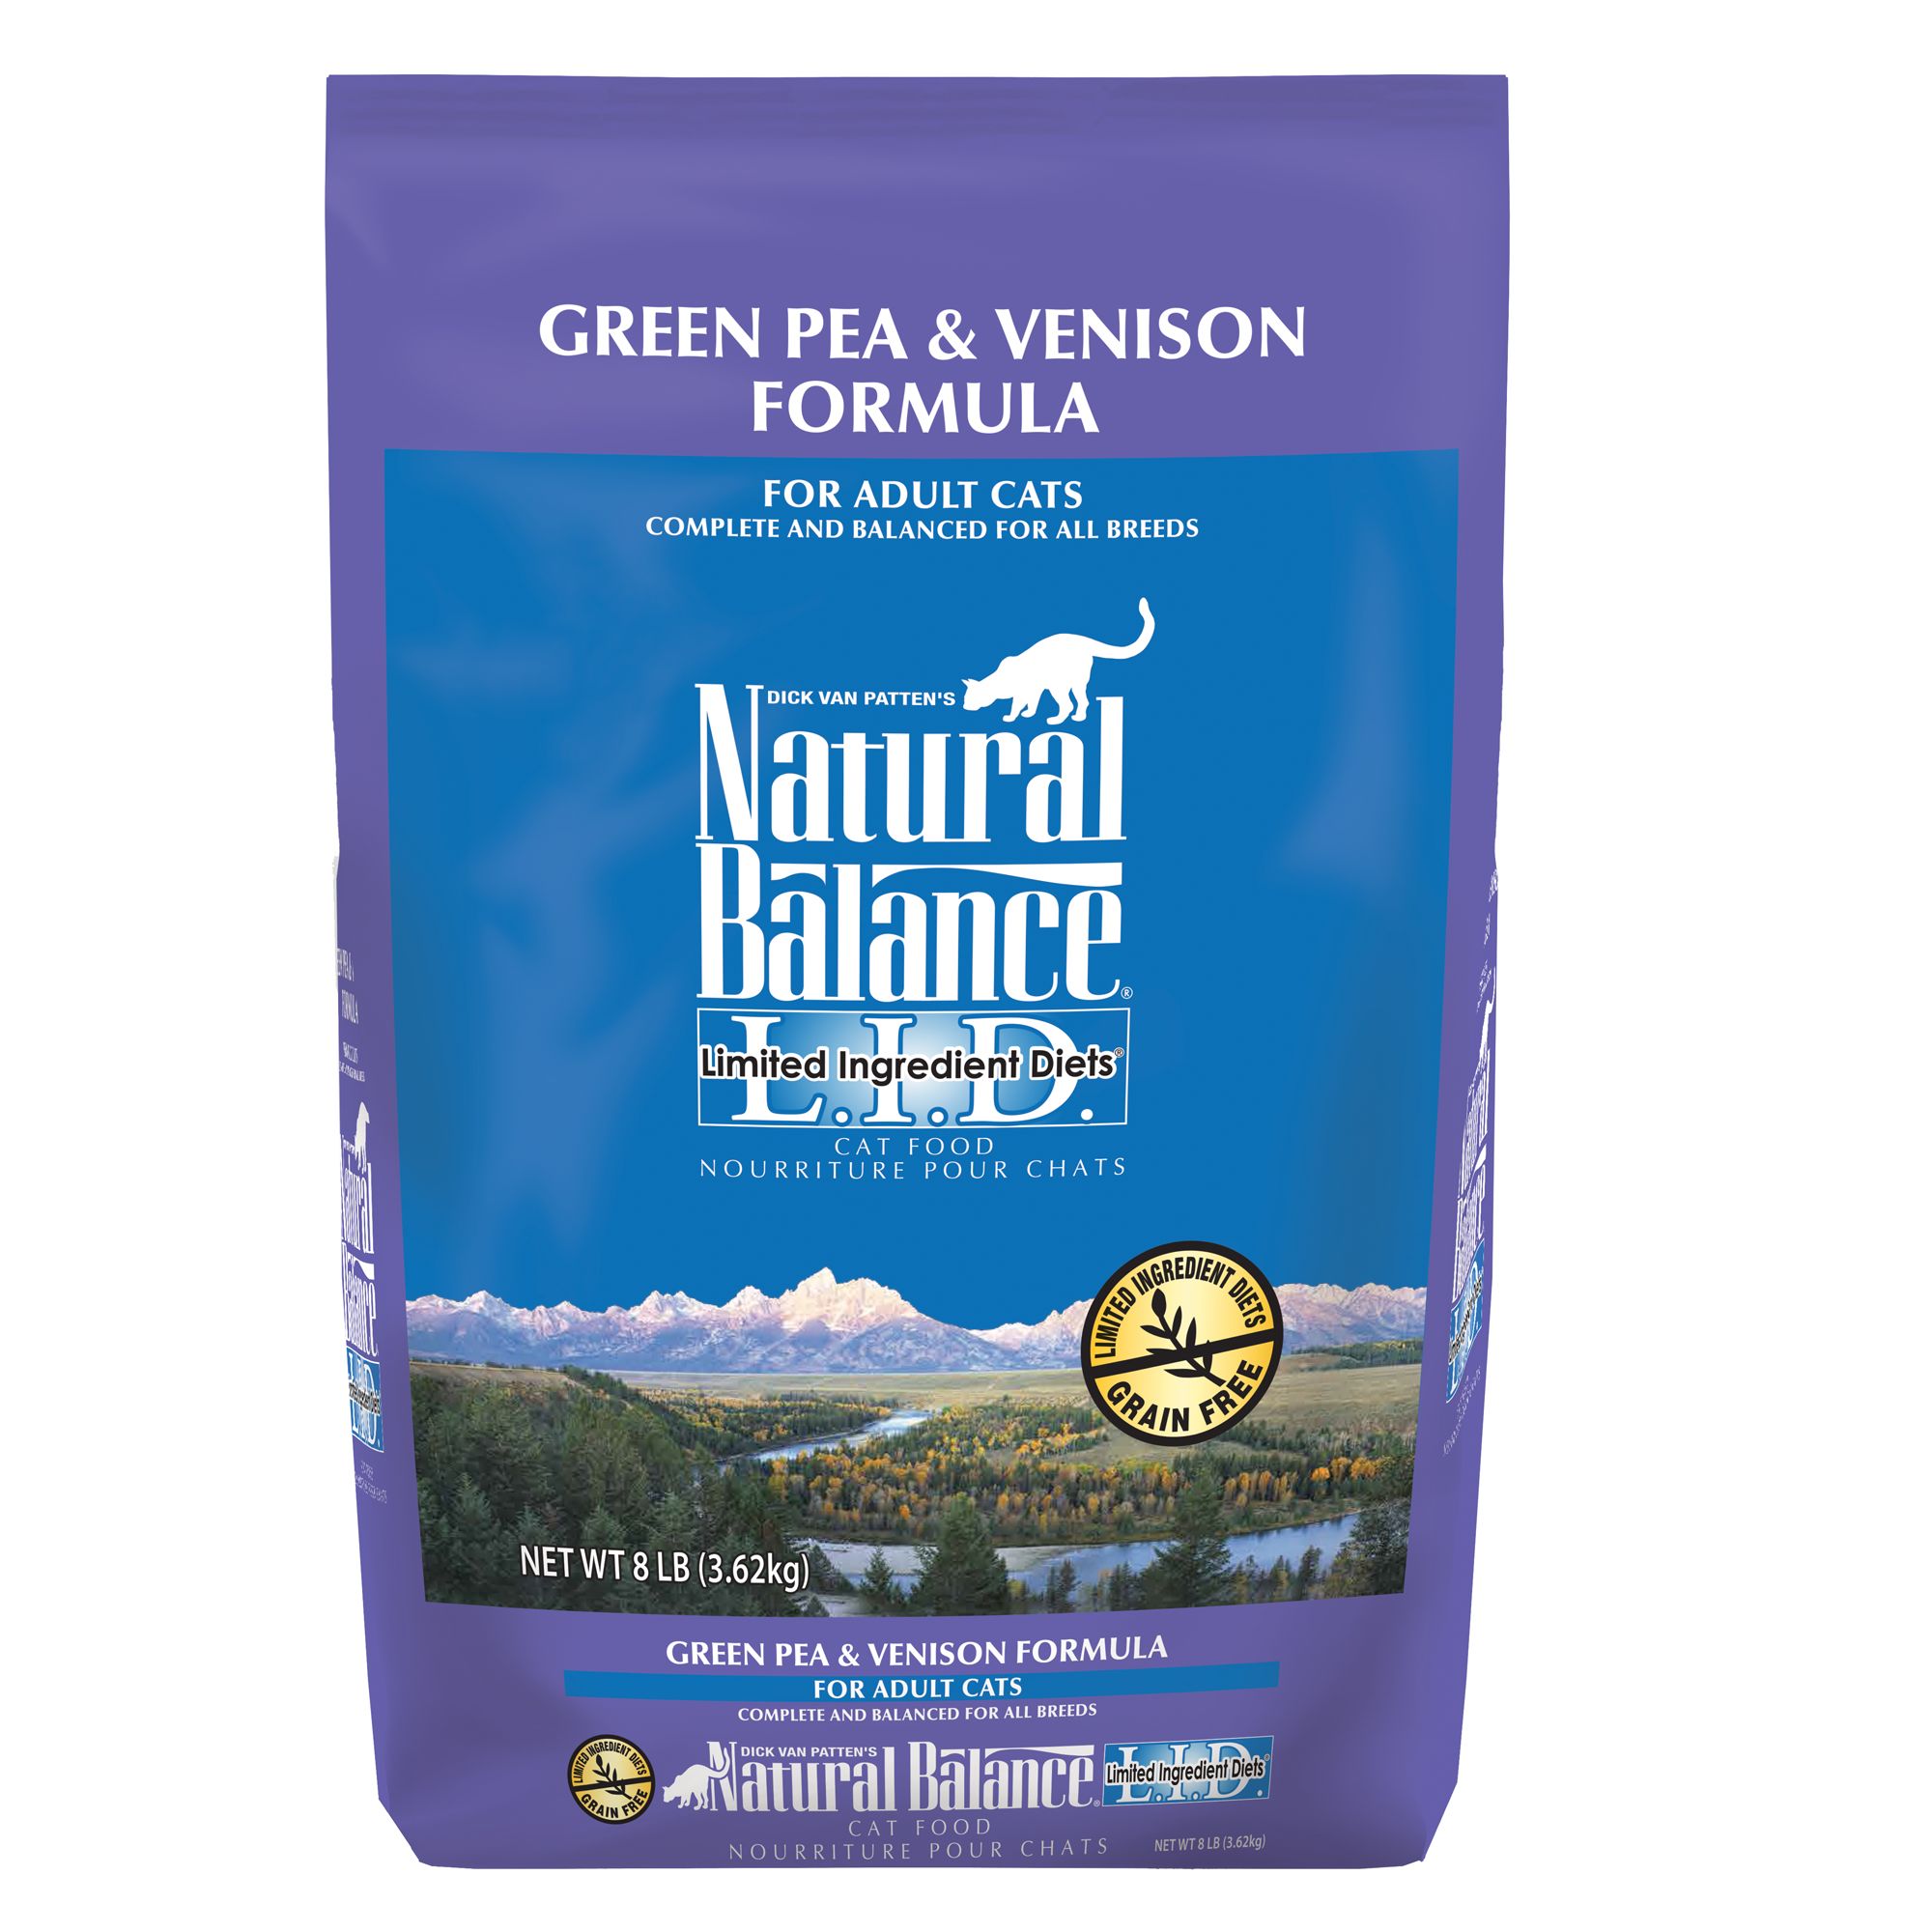 Natural Balance Limited Ingredients Diet Adult Cat Food - 